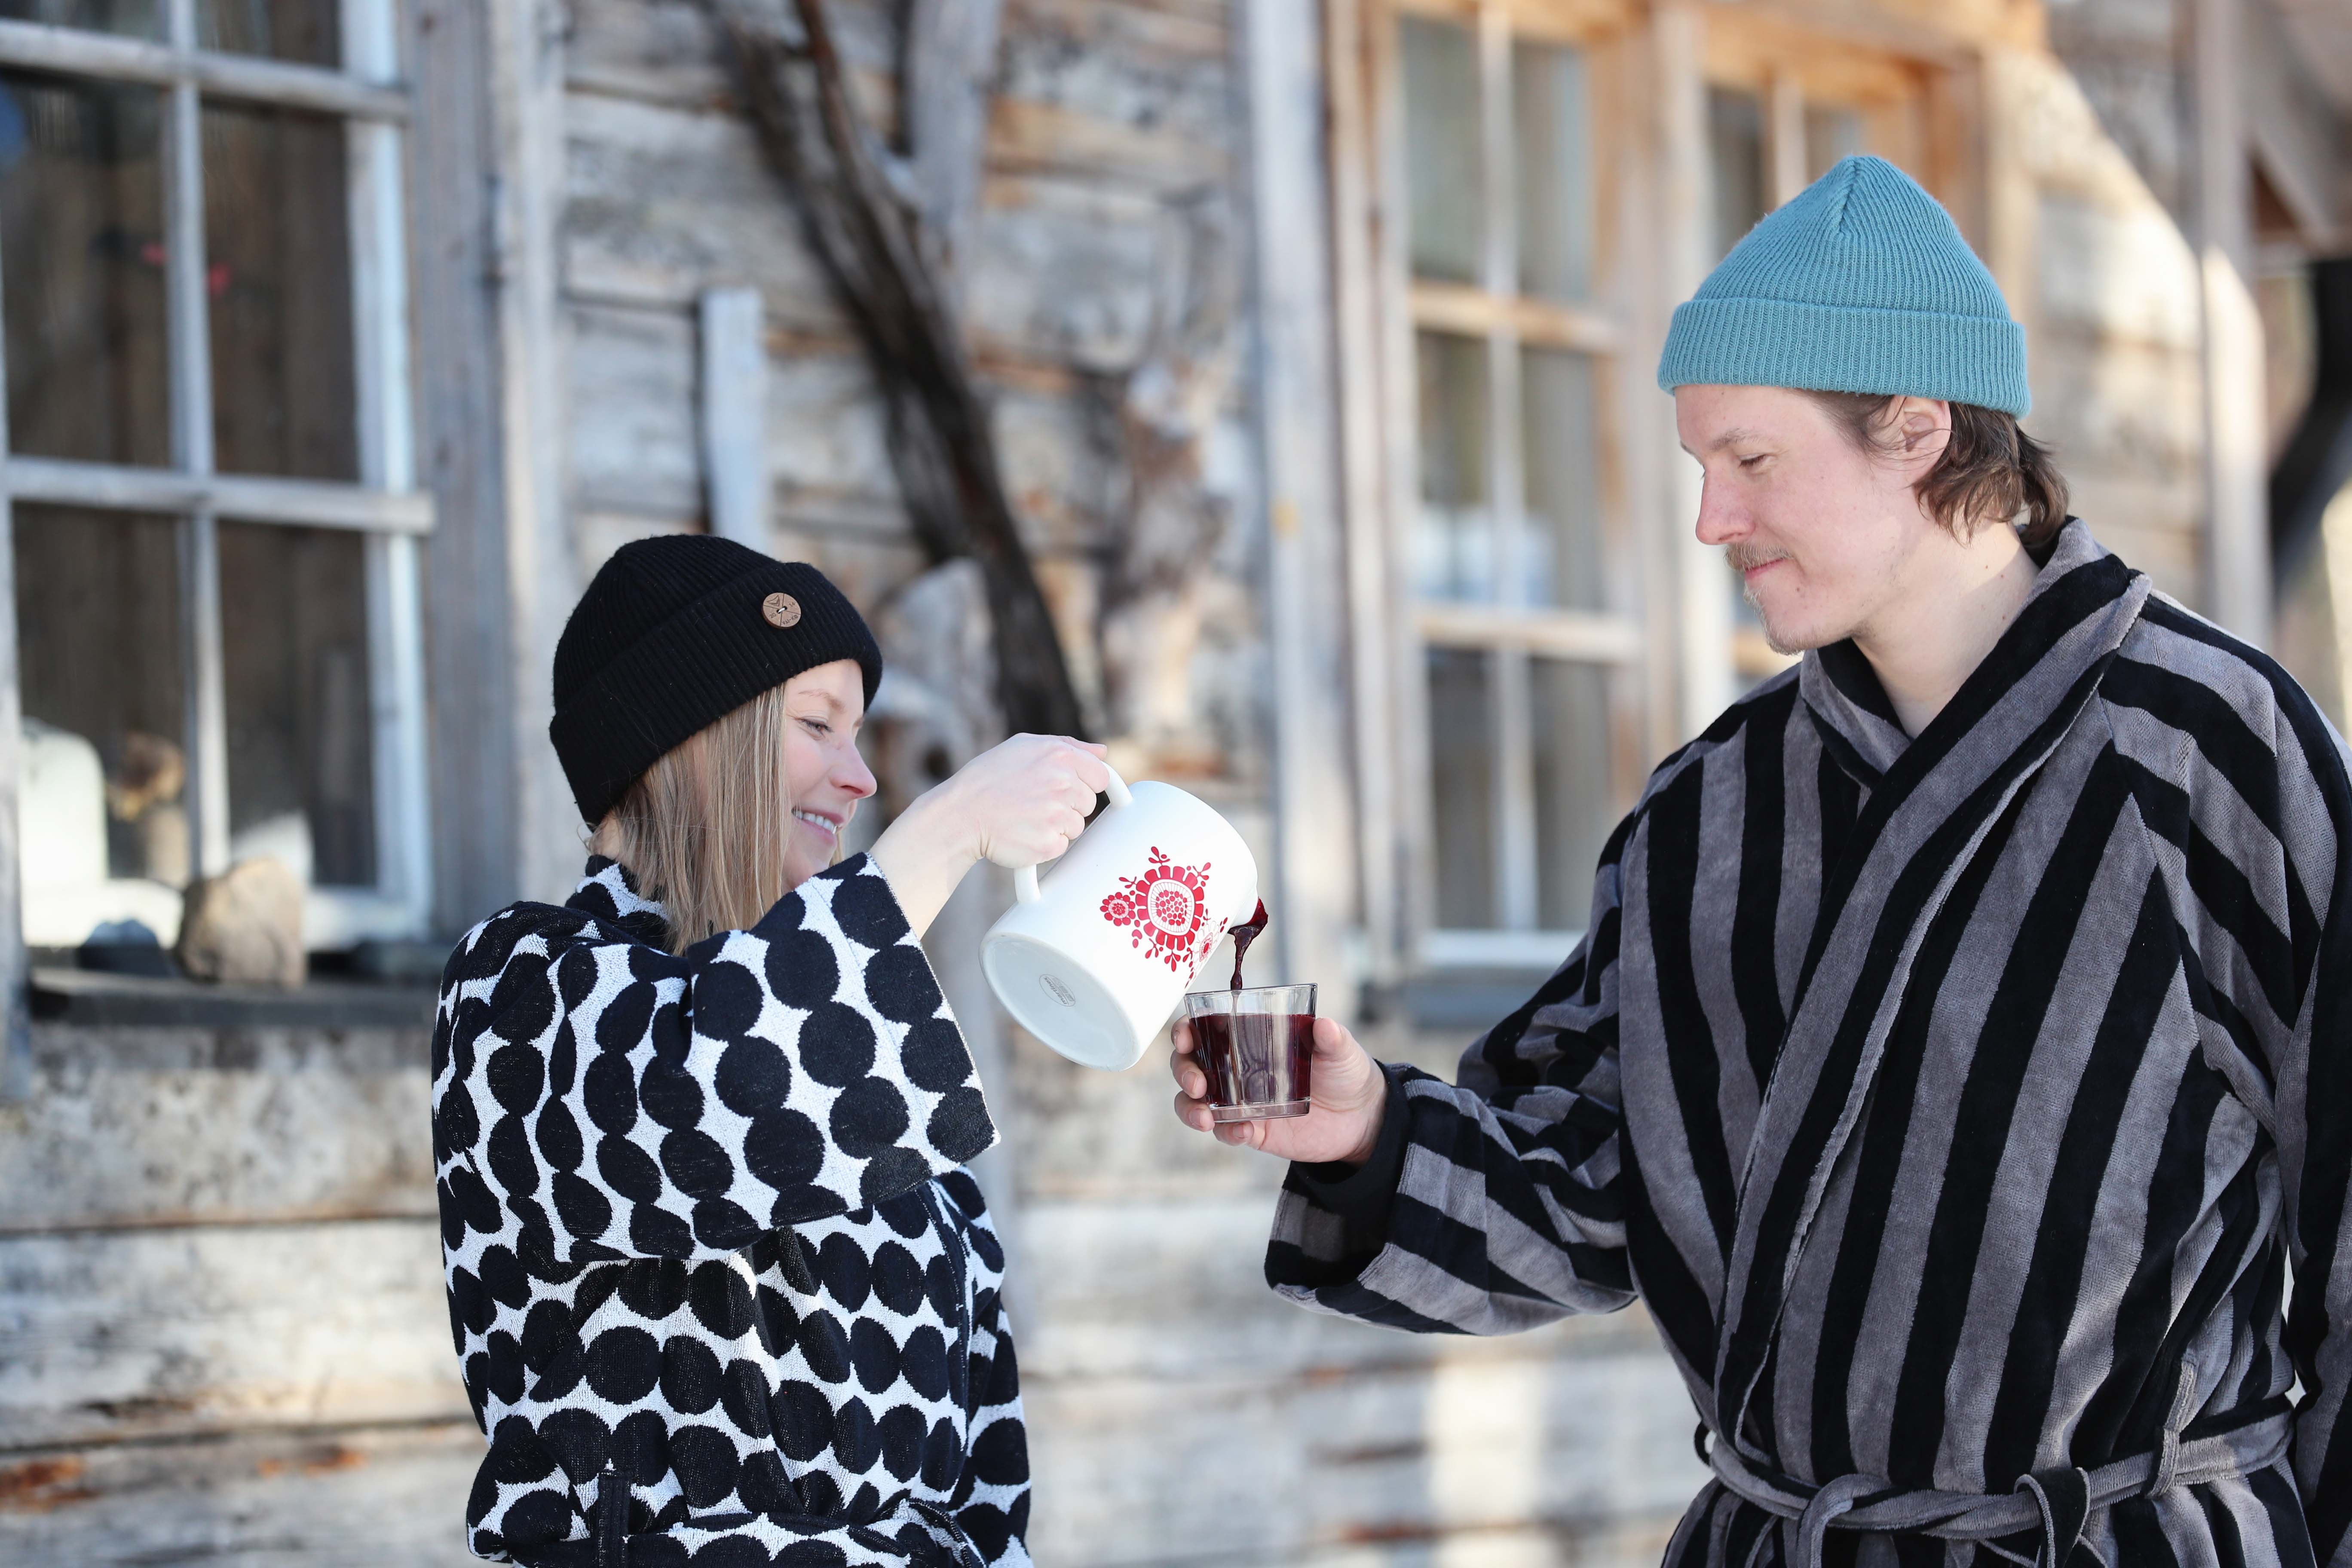 A couple enjoying hot beverages outside in a snow after sauna bathing